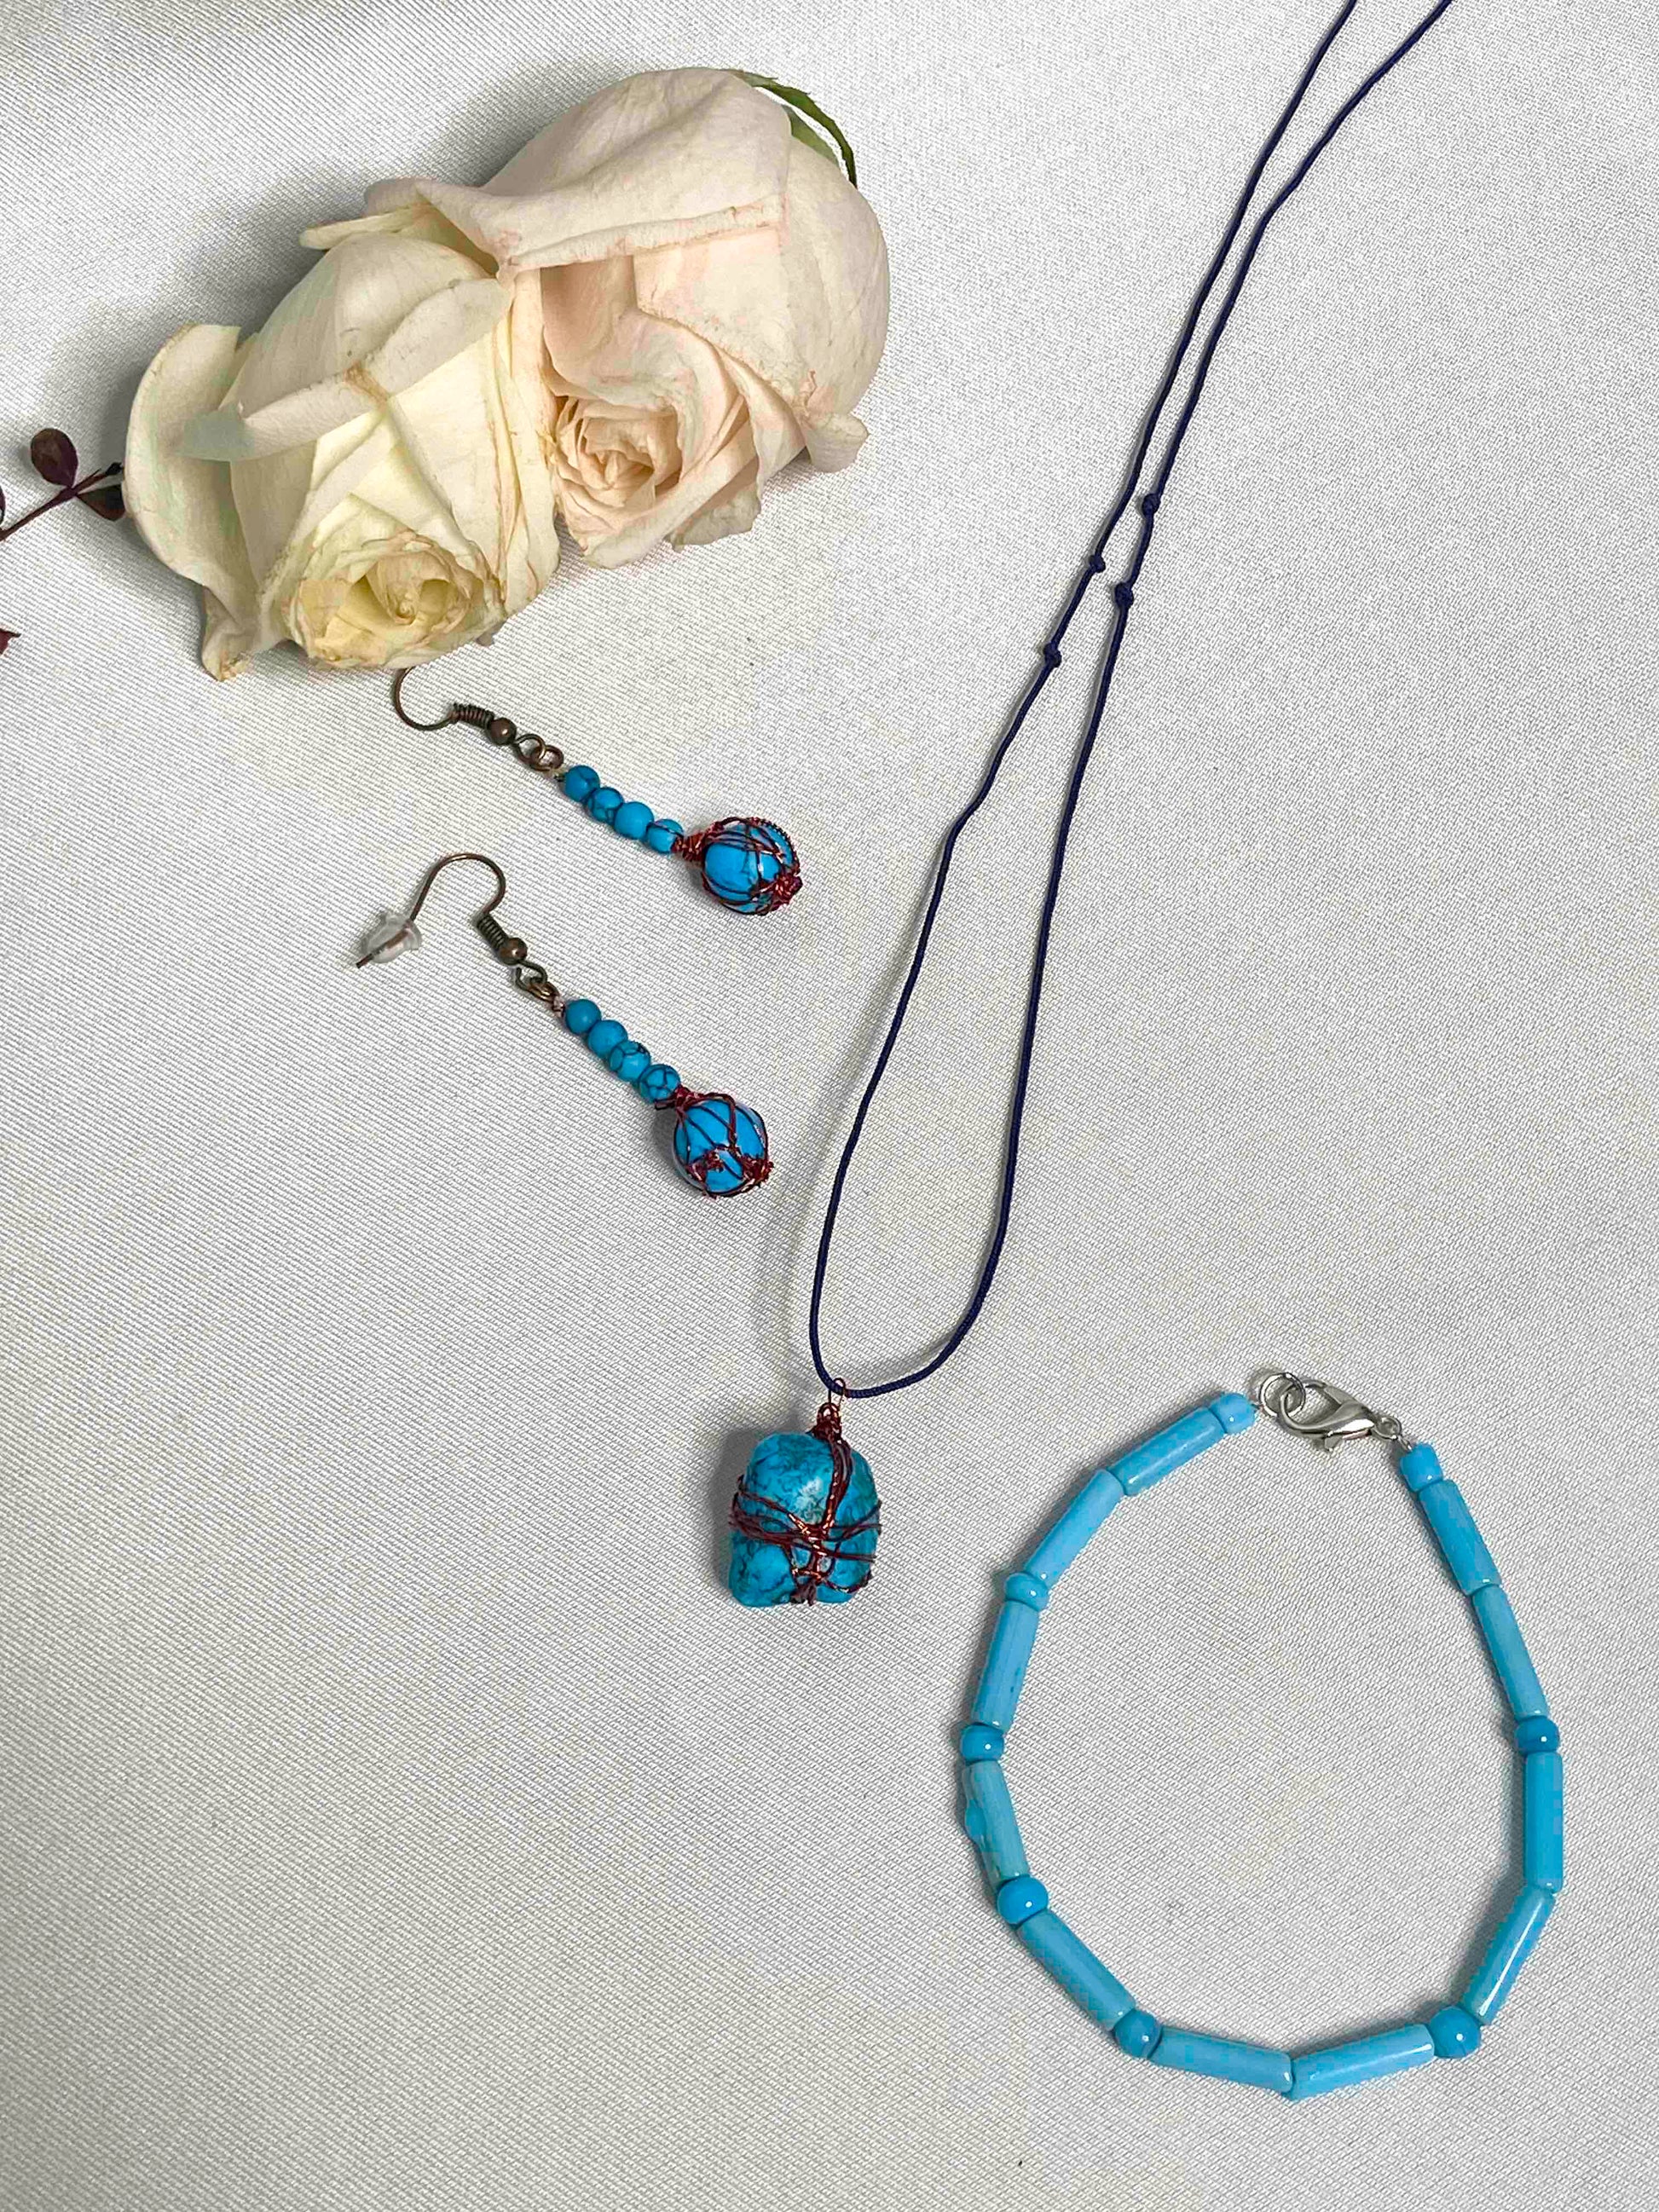 A pair of handcrafted wire-wrapped and beaded turquoise earrings, a matching pendant necklace, and beaded bracelet.